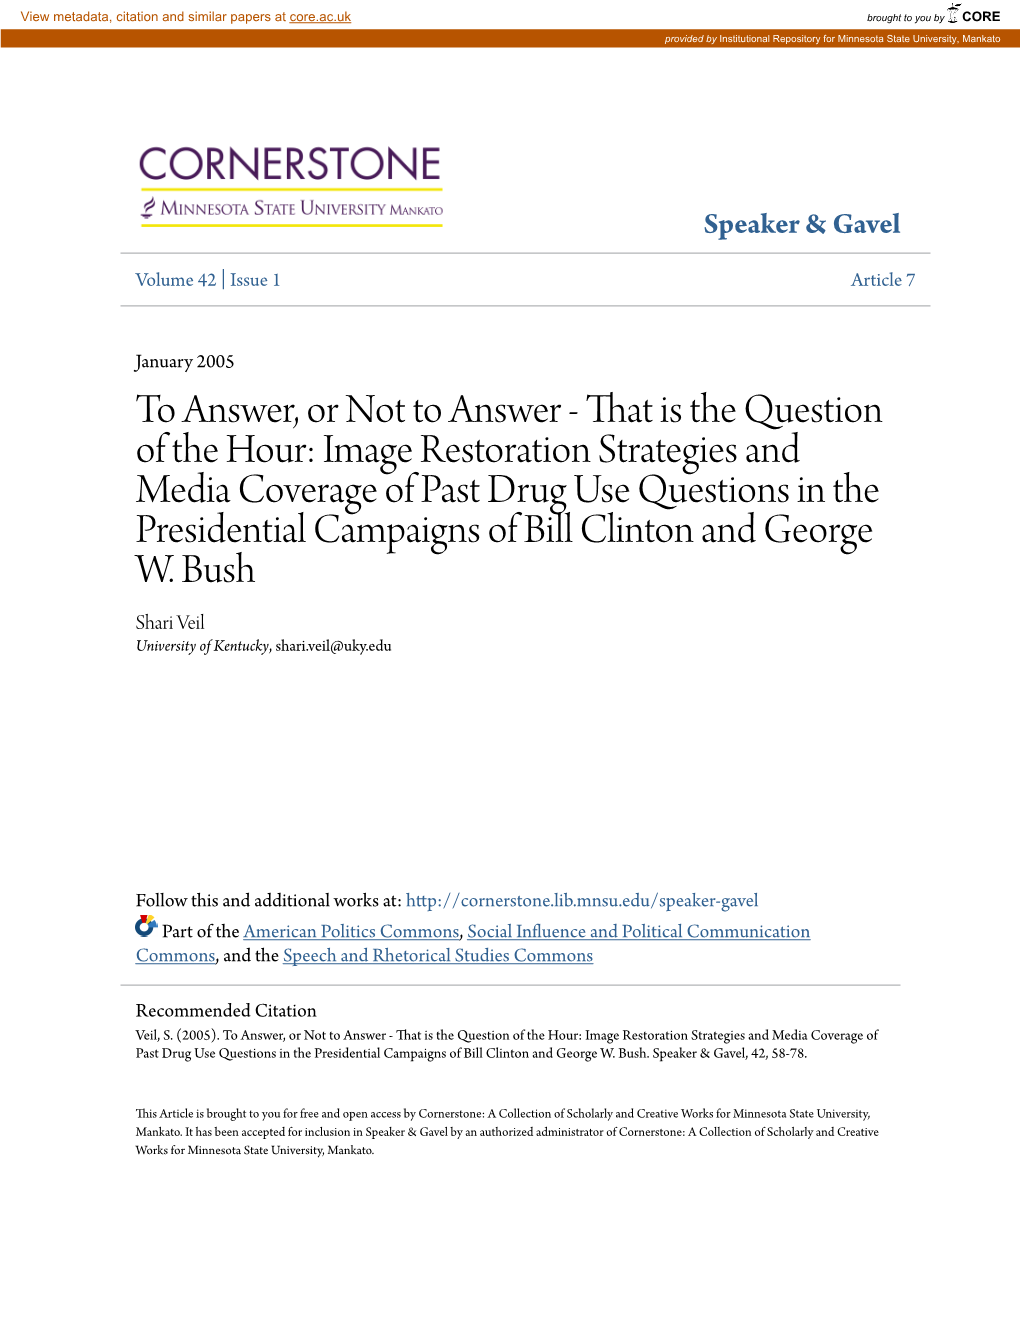 Image Restoration Strategies and Media Coverage of Past Drug Use Questions in the Presidential Campaigns of Bill Clinton and George W